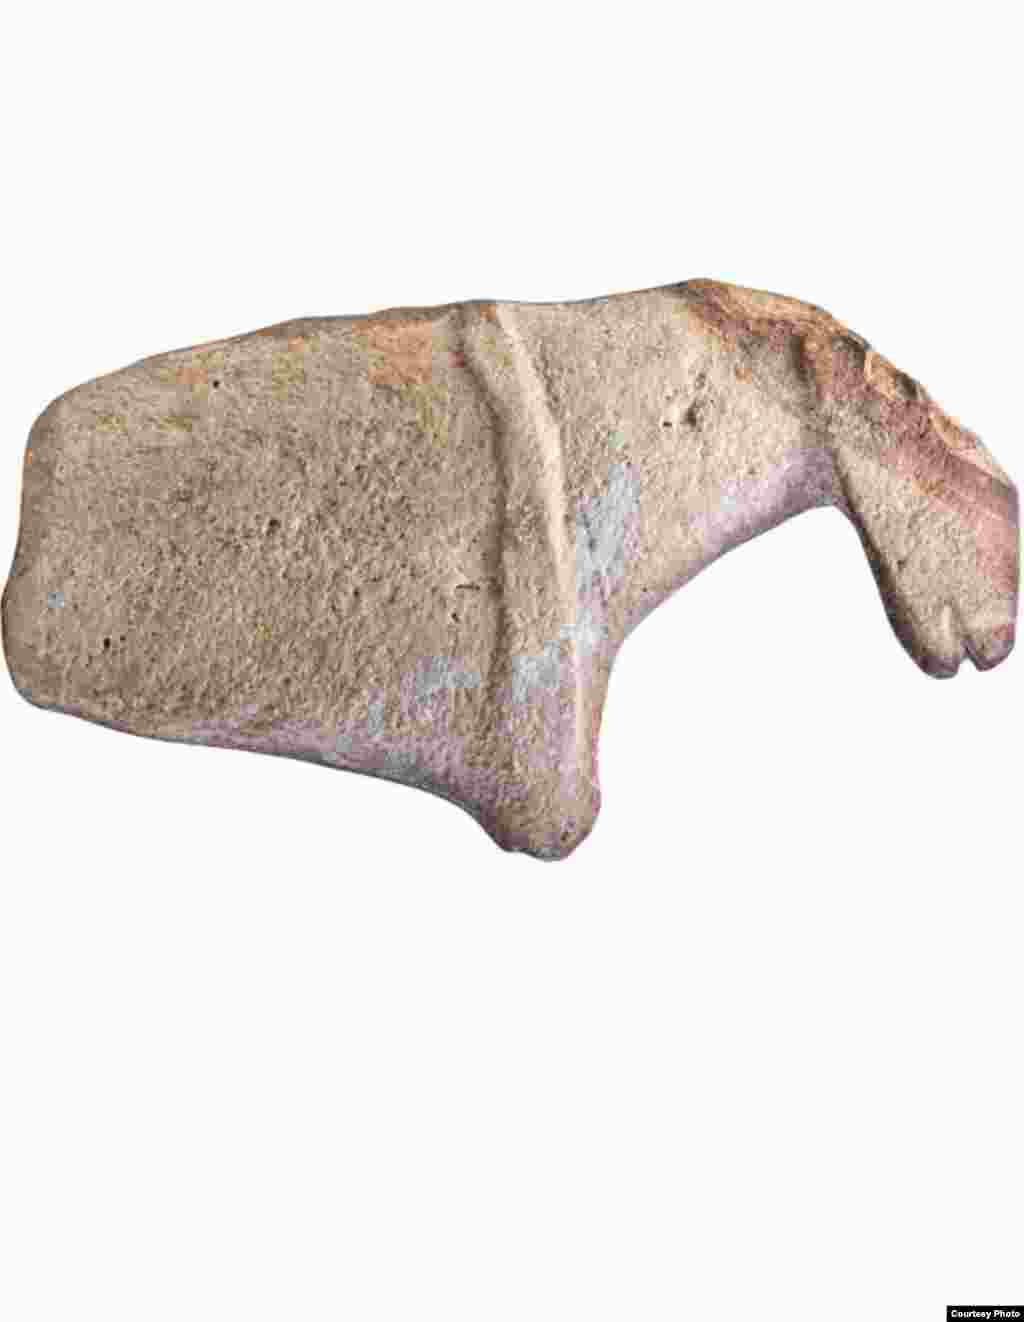 This is a fragment of a member of the horse family. Fine markings around the muzzle and shoulder hint at an early bridle. Dated from about 7000 BCE, it suggests the domestication of the horse may have occurred far earlier than 3500 BCE in Central Asia. (F